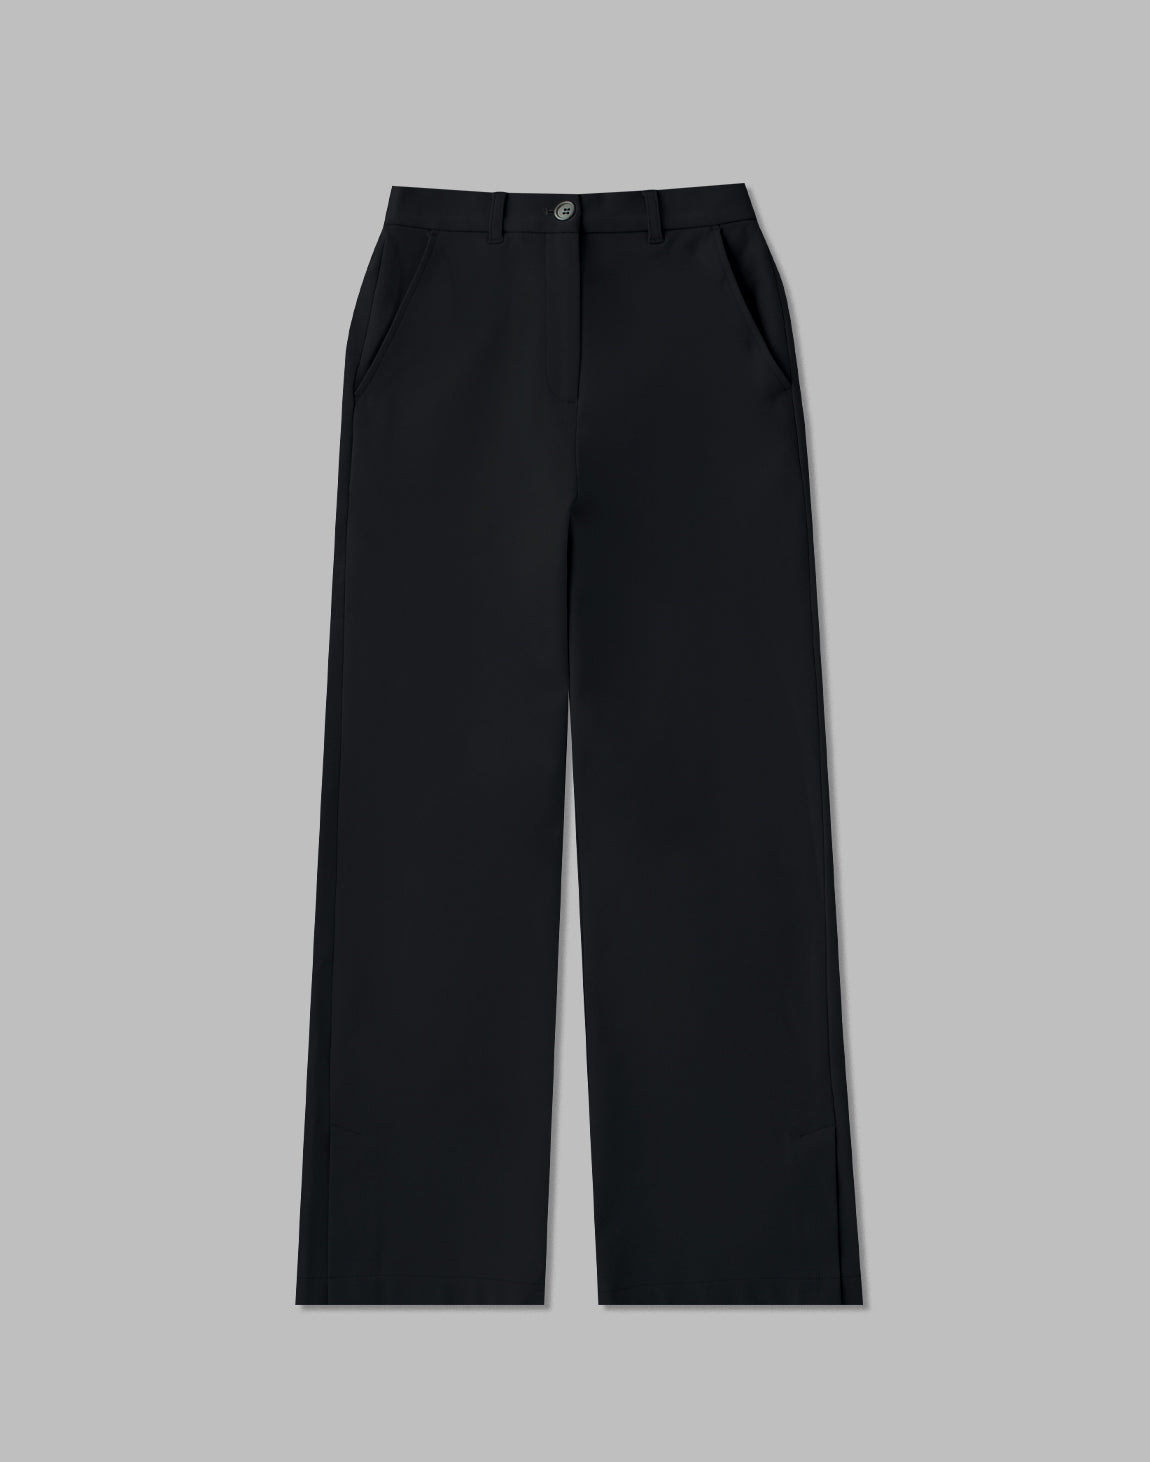 CRONOS WOMEN EASY CARE STRETCH PANTS – クロノス CRONOS Official Store